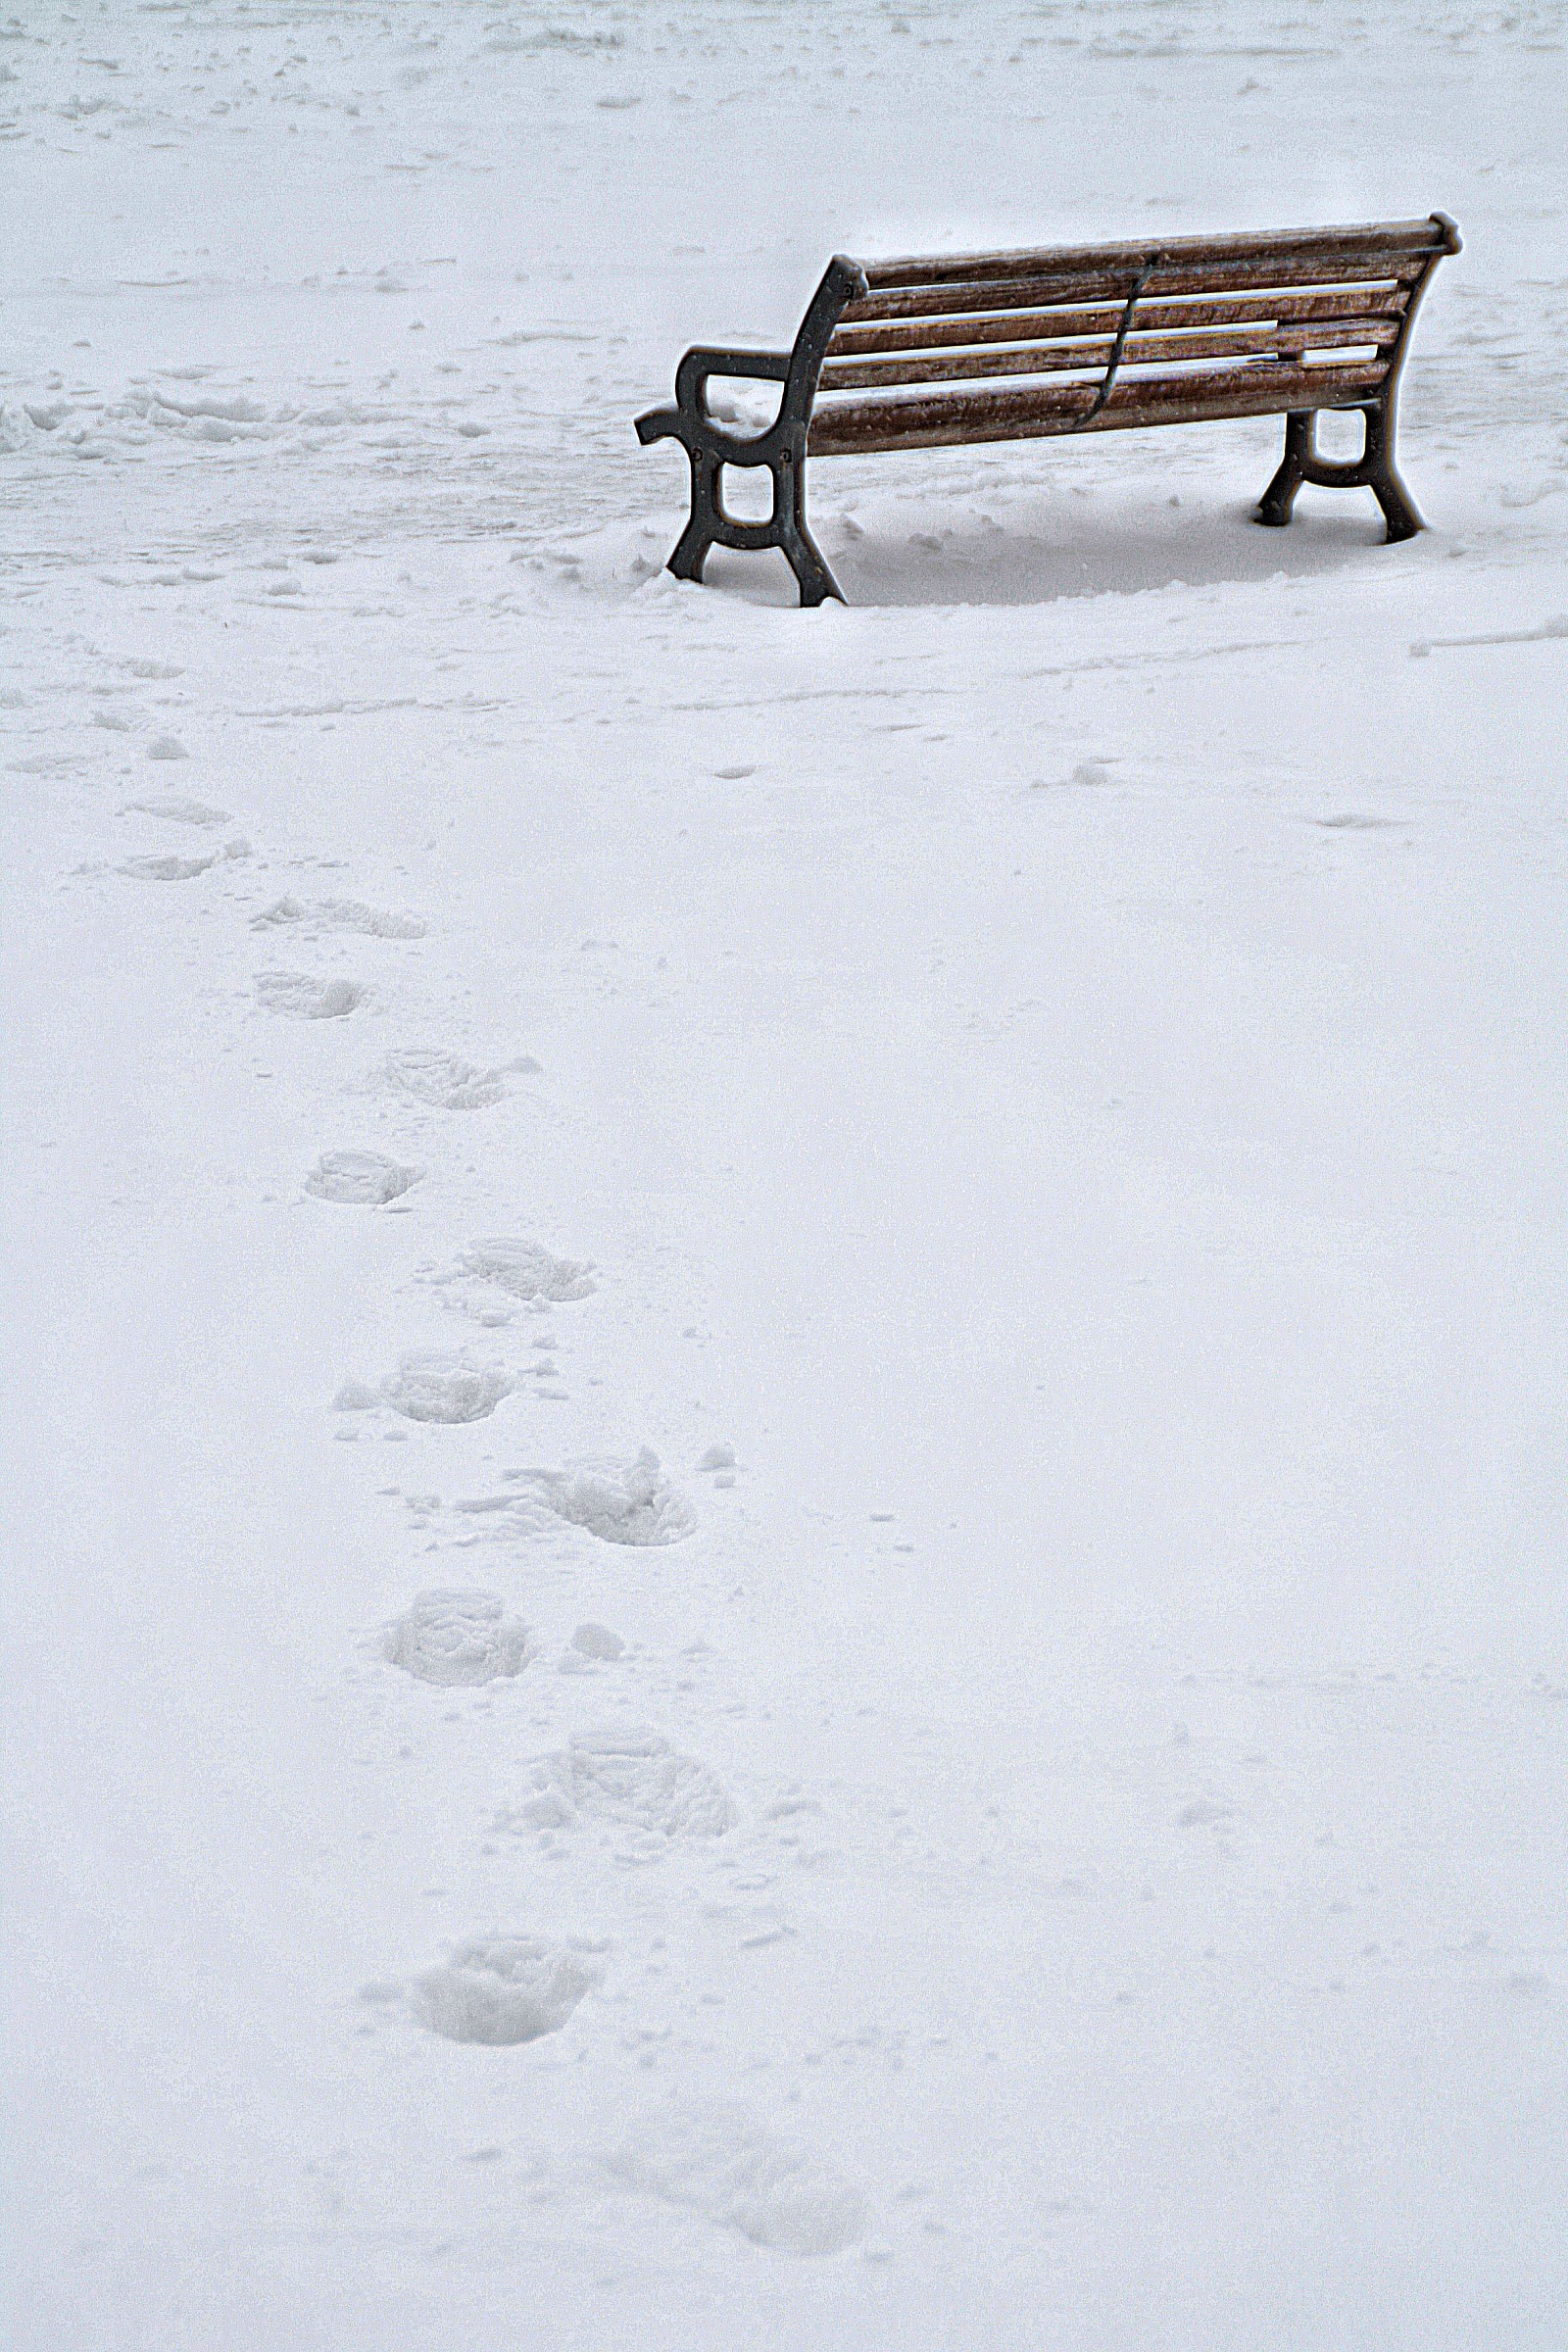 Footsteps in the snow...